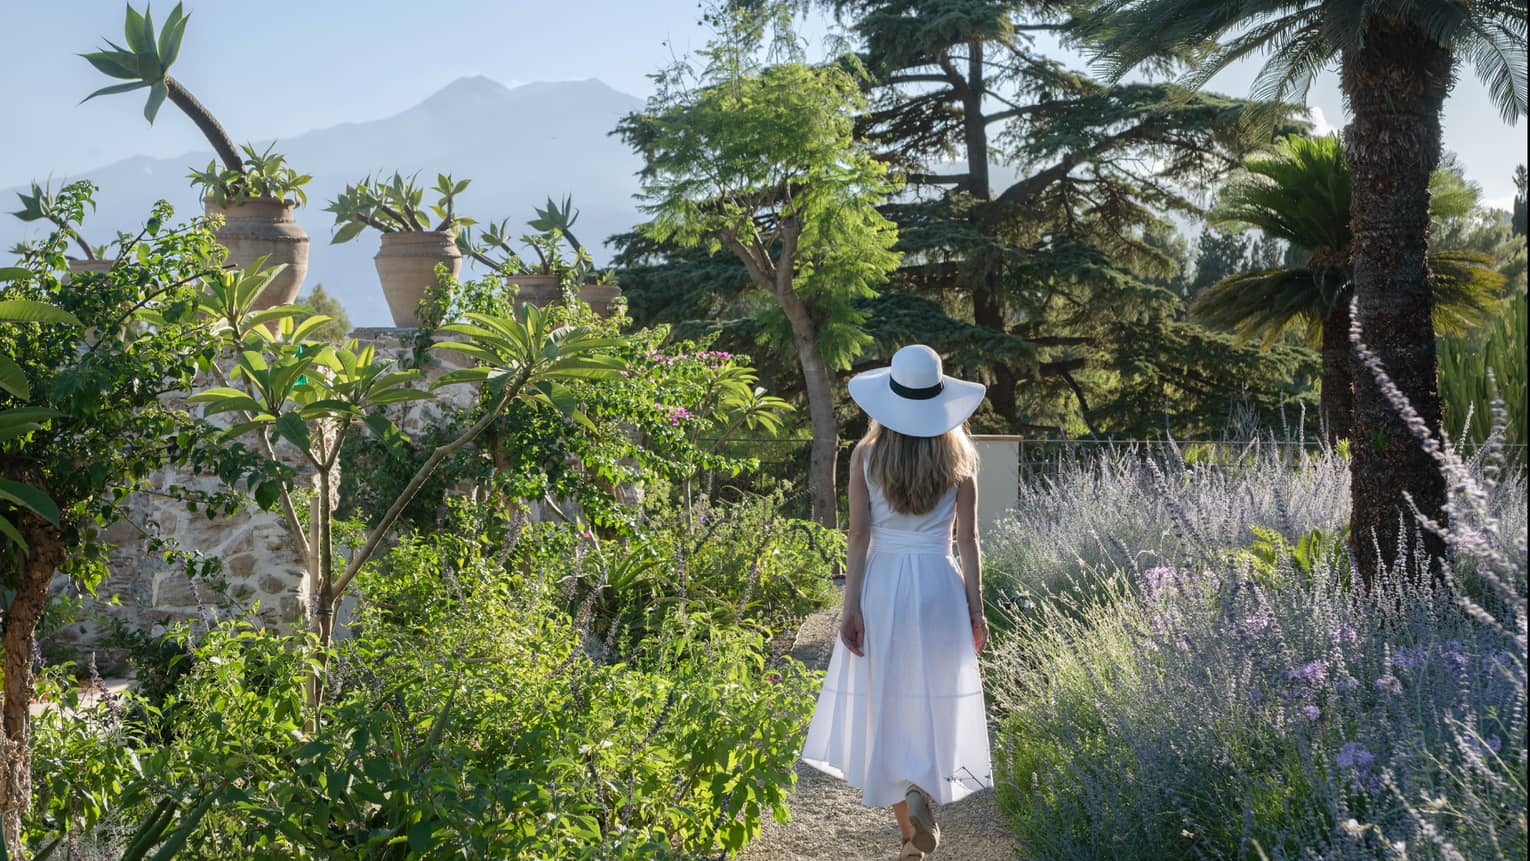 Woman in white dress walking on path in garden with Mount Etna in distance